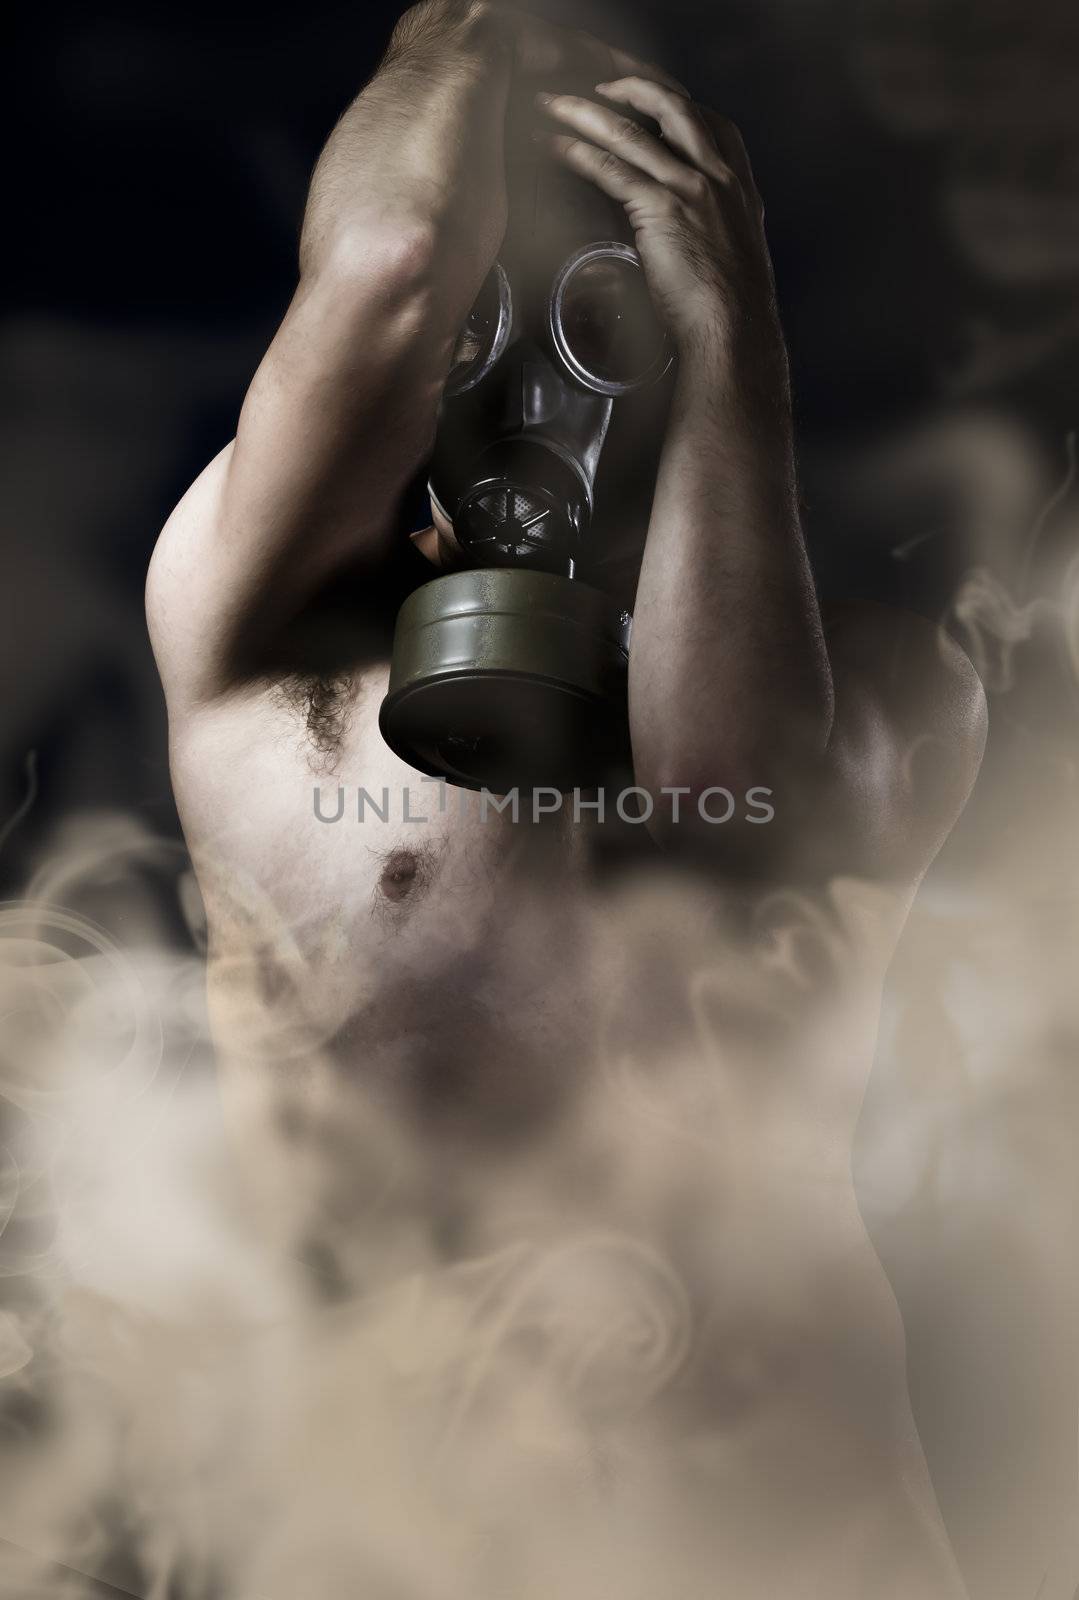 Suffering, naked man with gas mask, retro